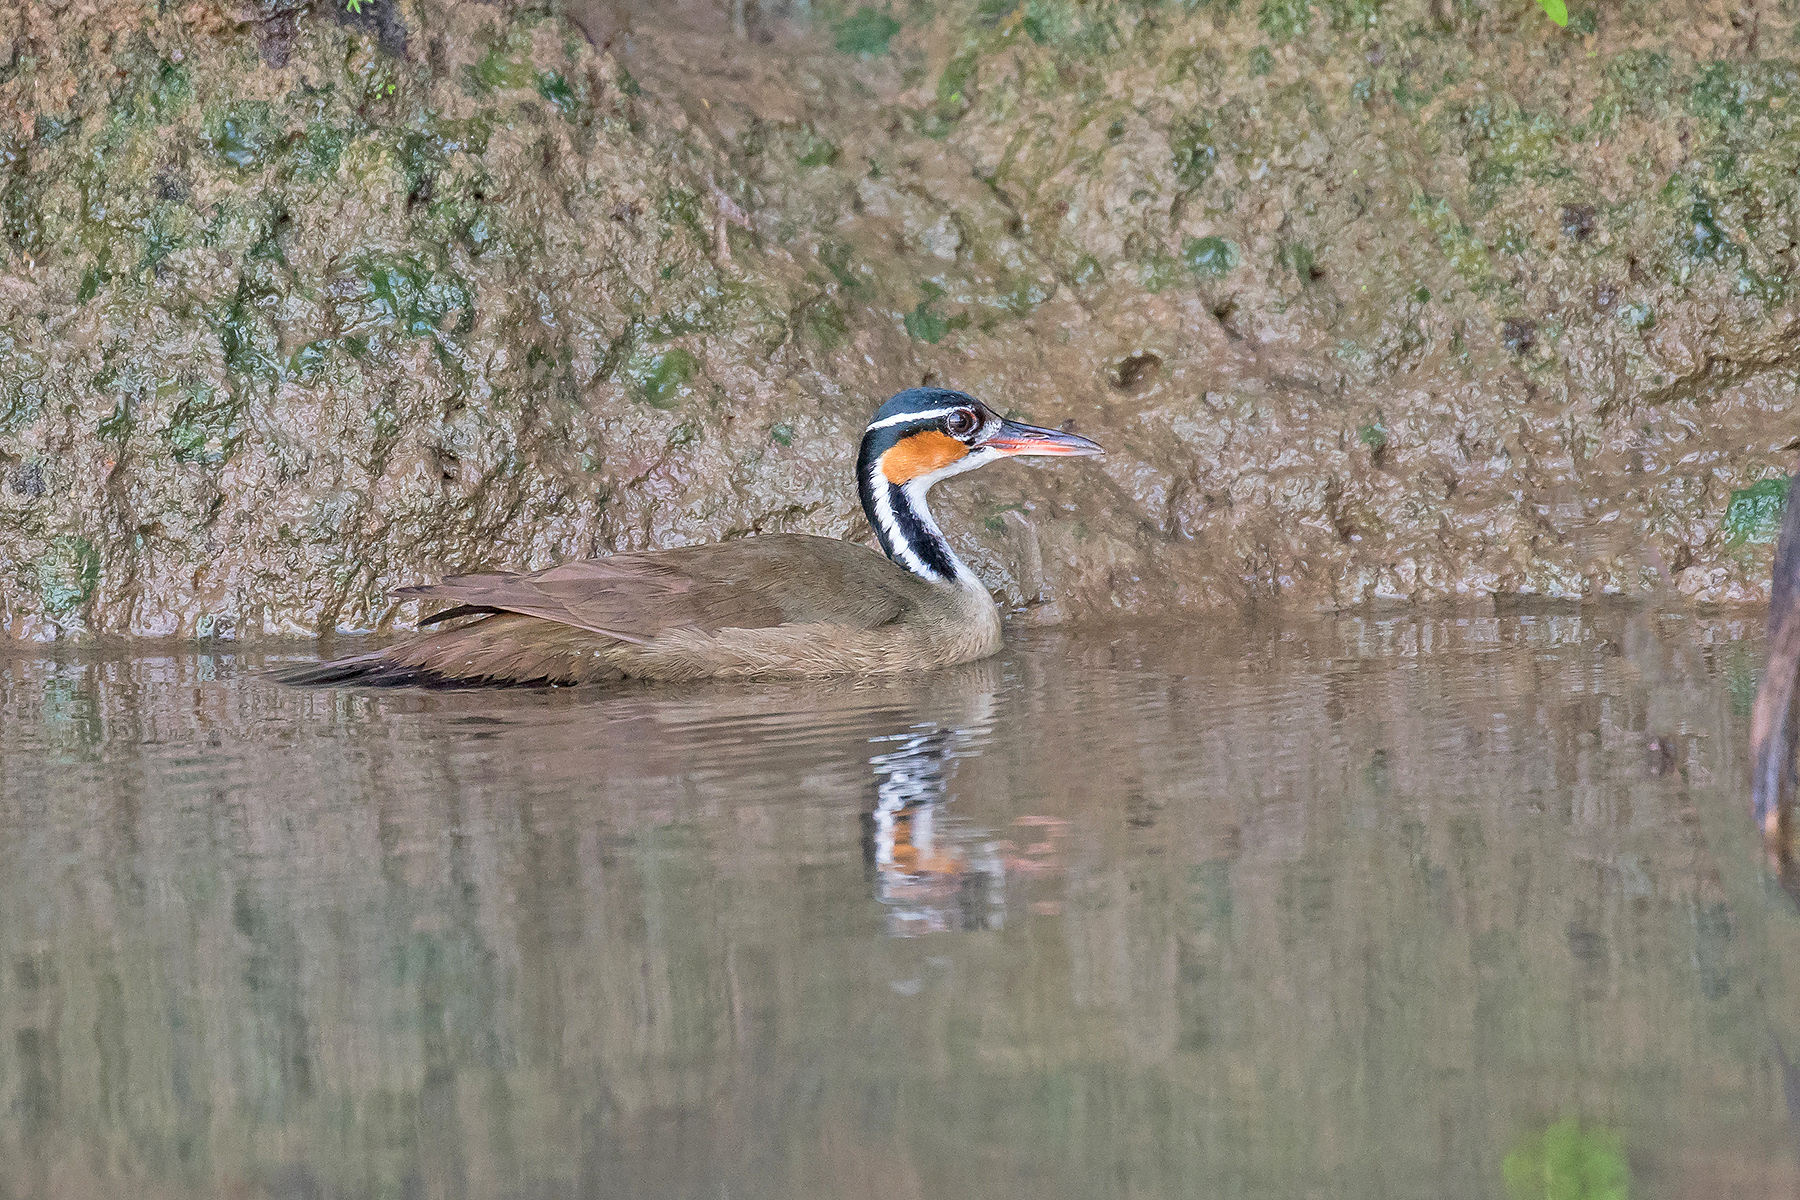 Sungrebe on our Costa Rica birding tour (image by Pete Morris)